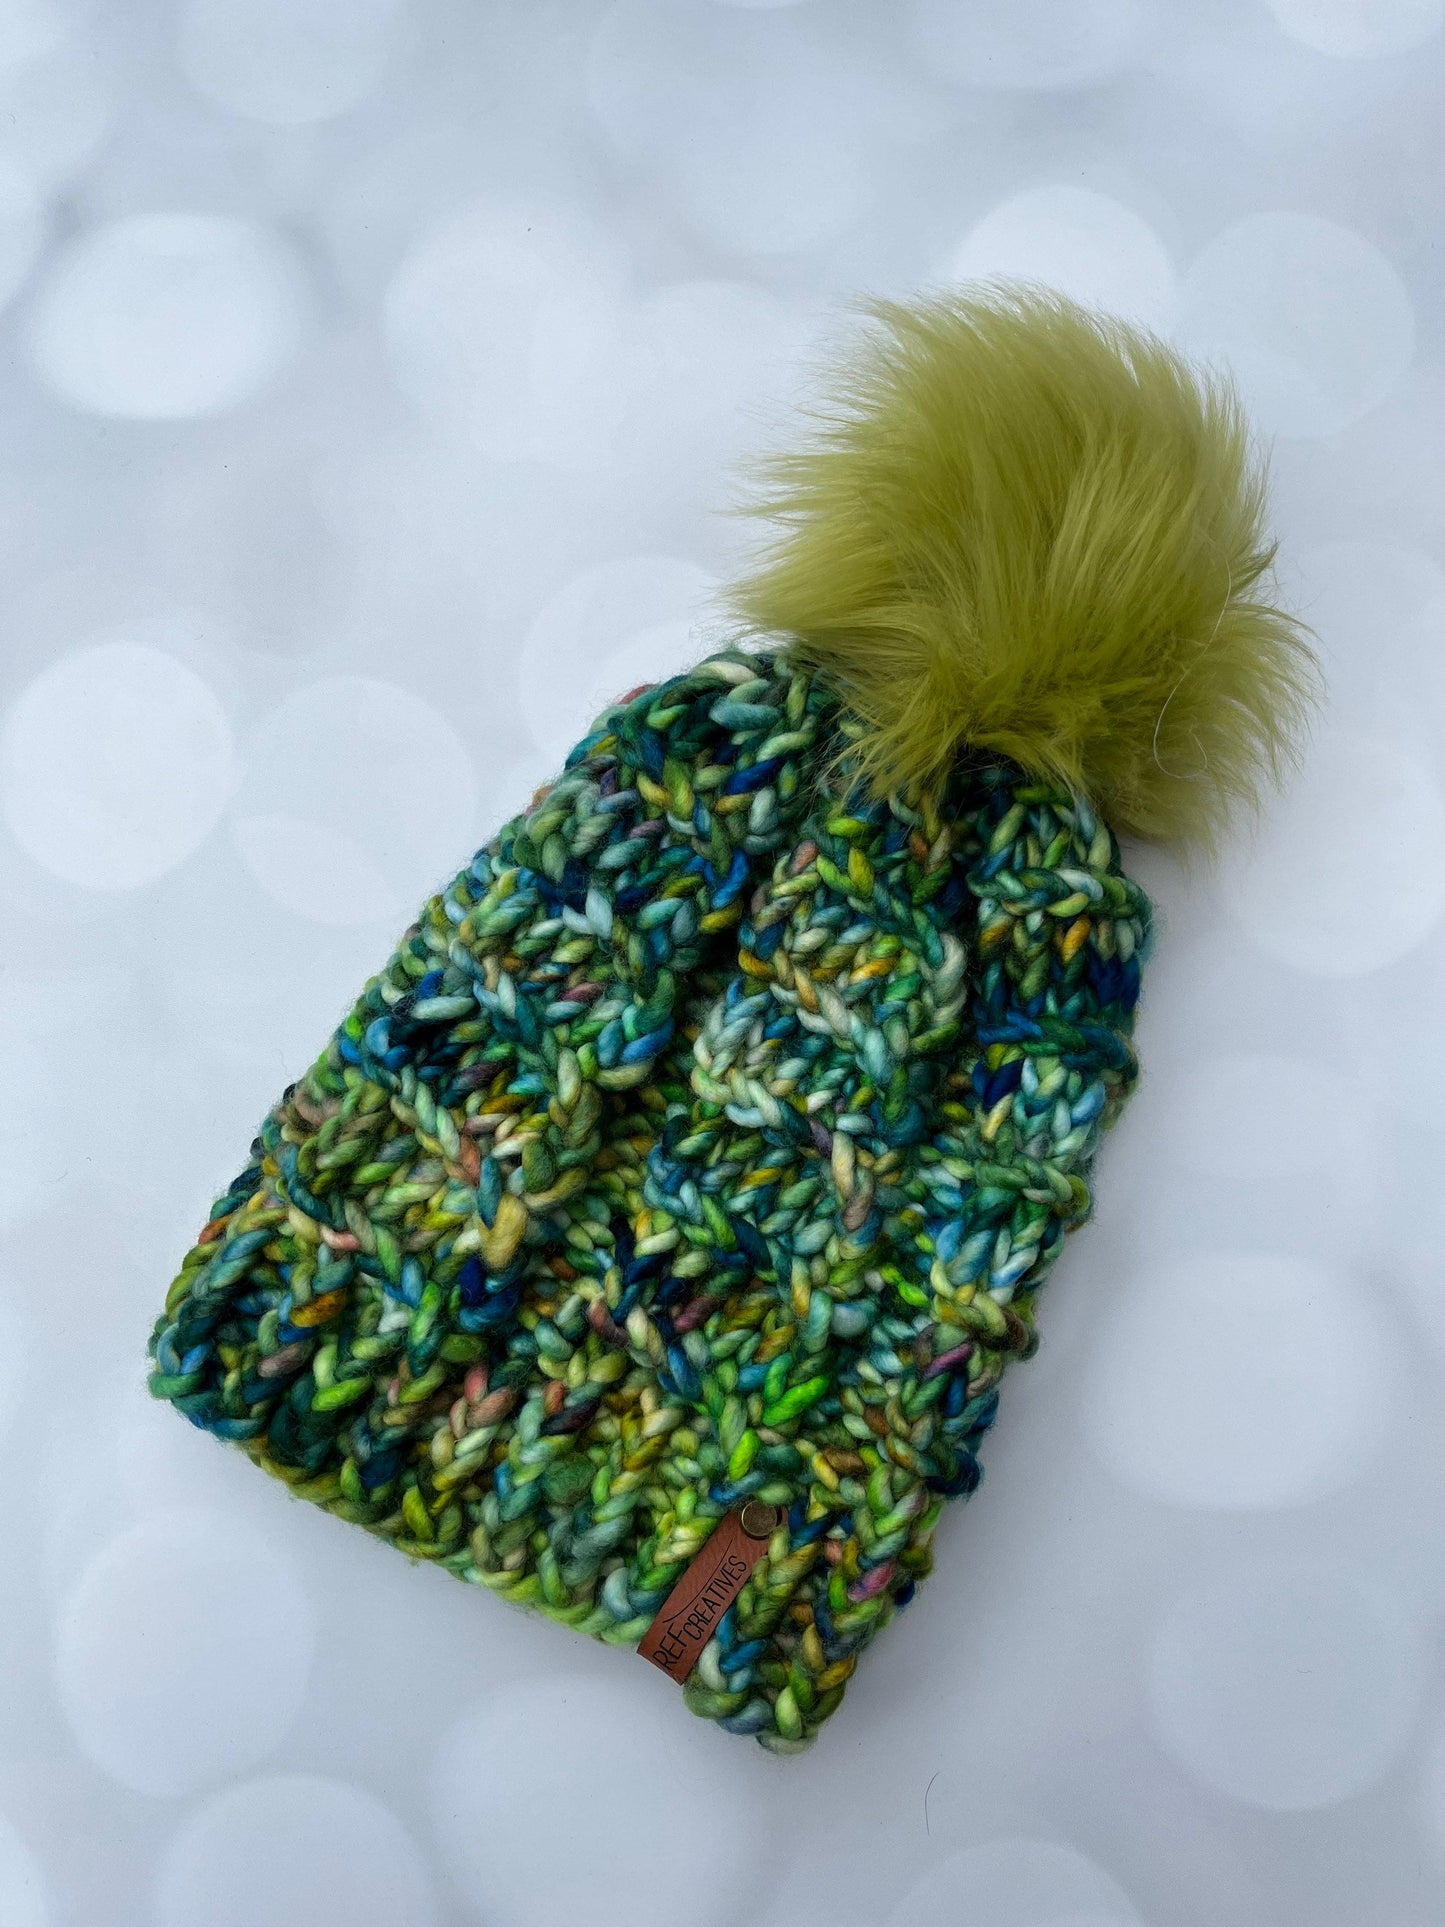 Botanical Climbing Ivy Hand Knit Hat with Hand Dyed Yarn